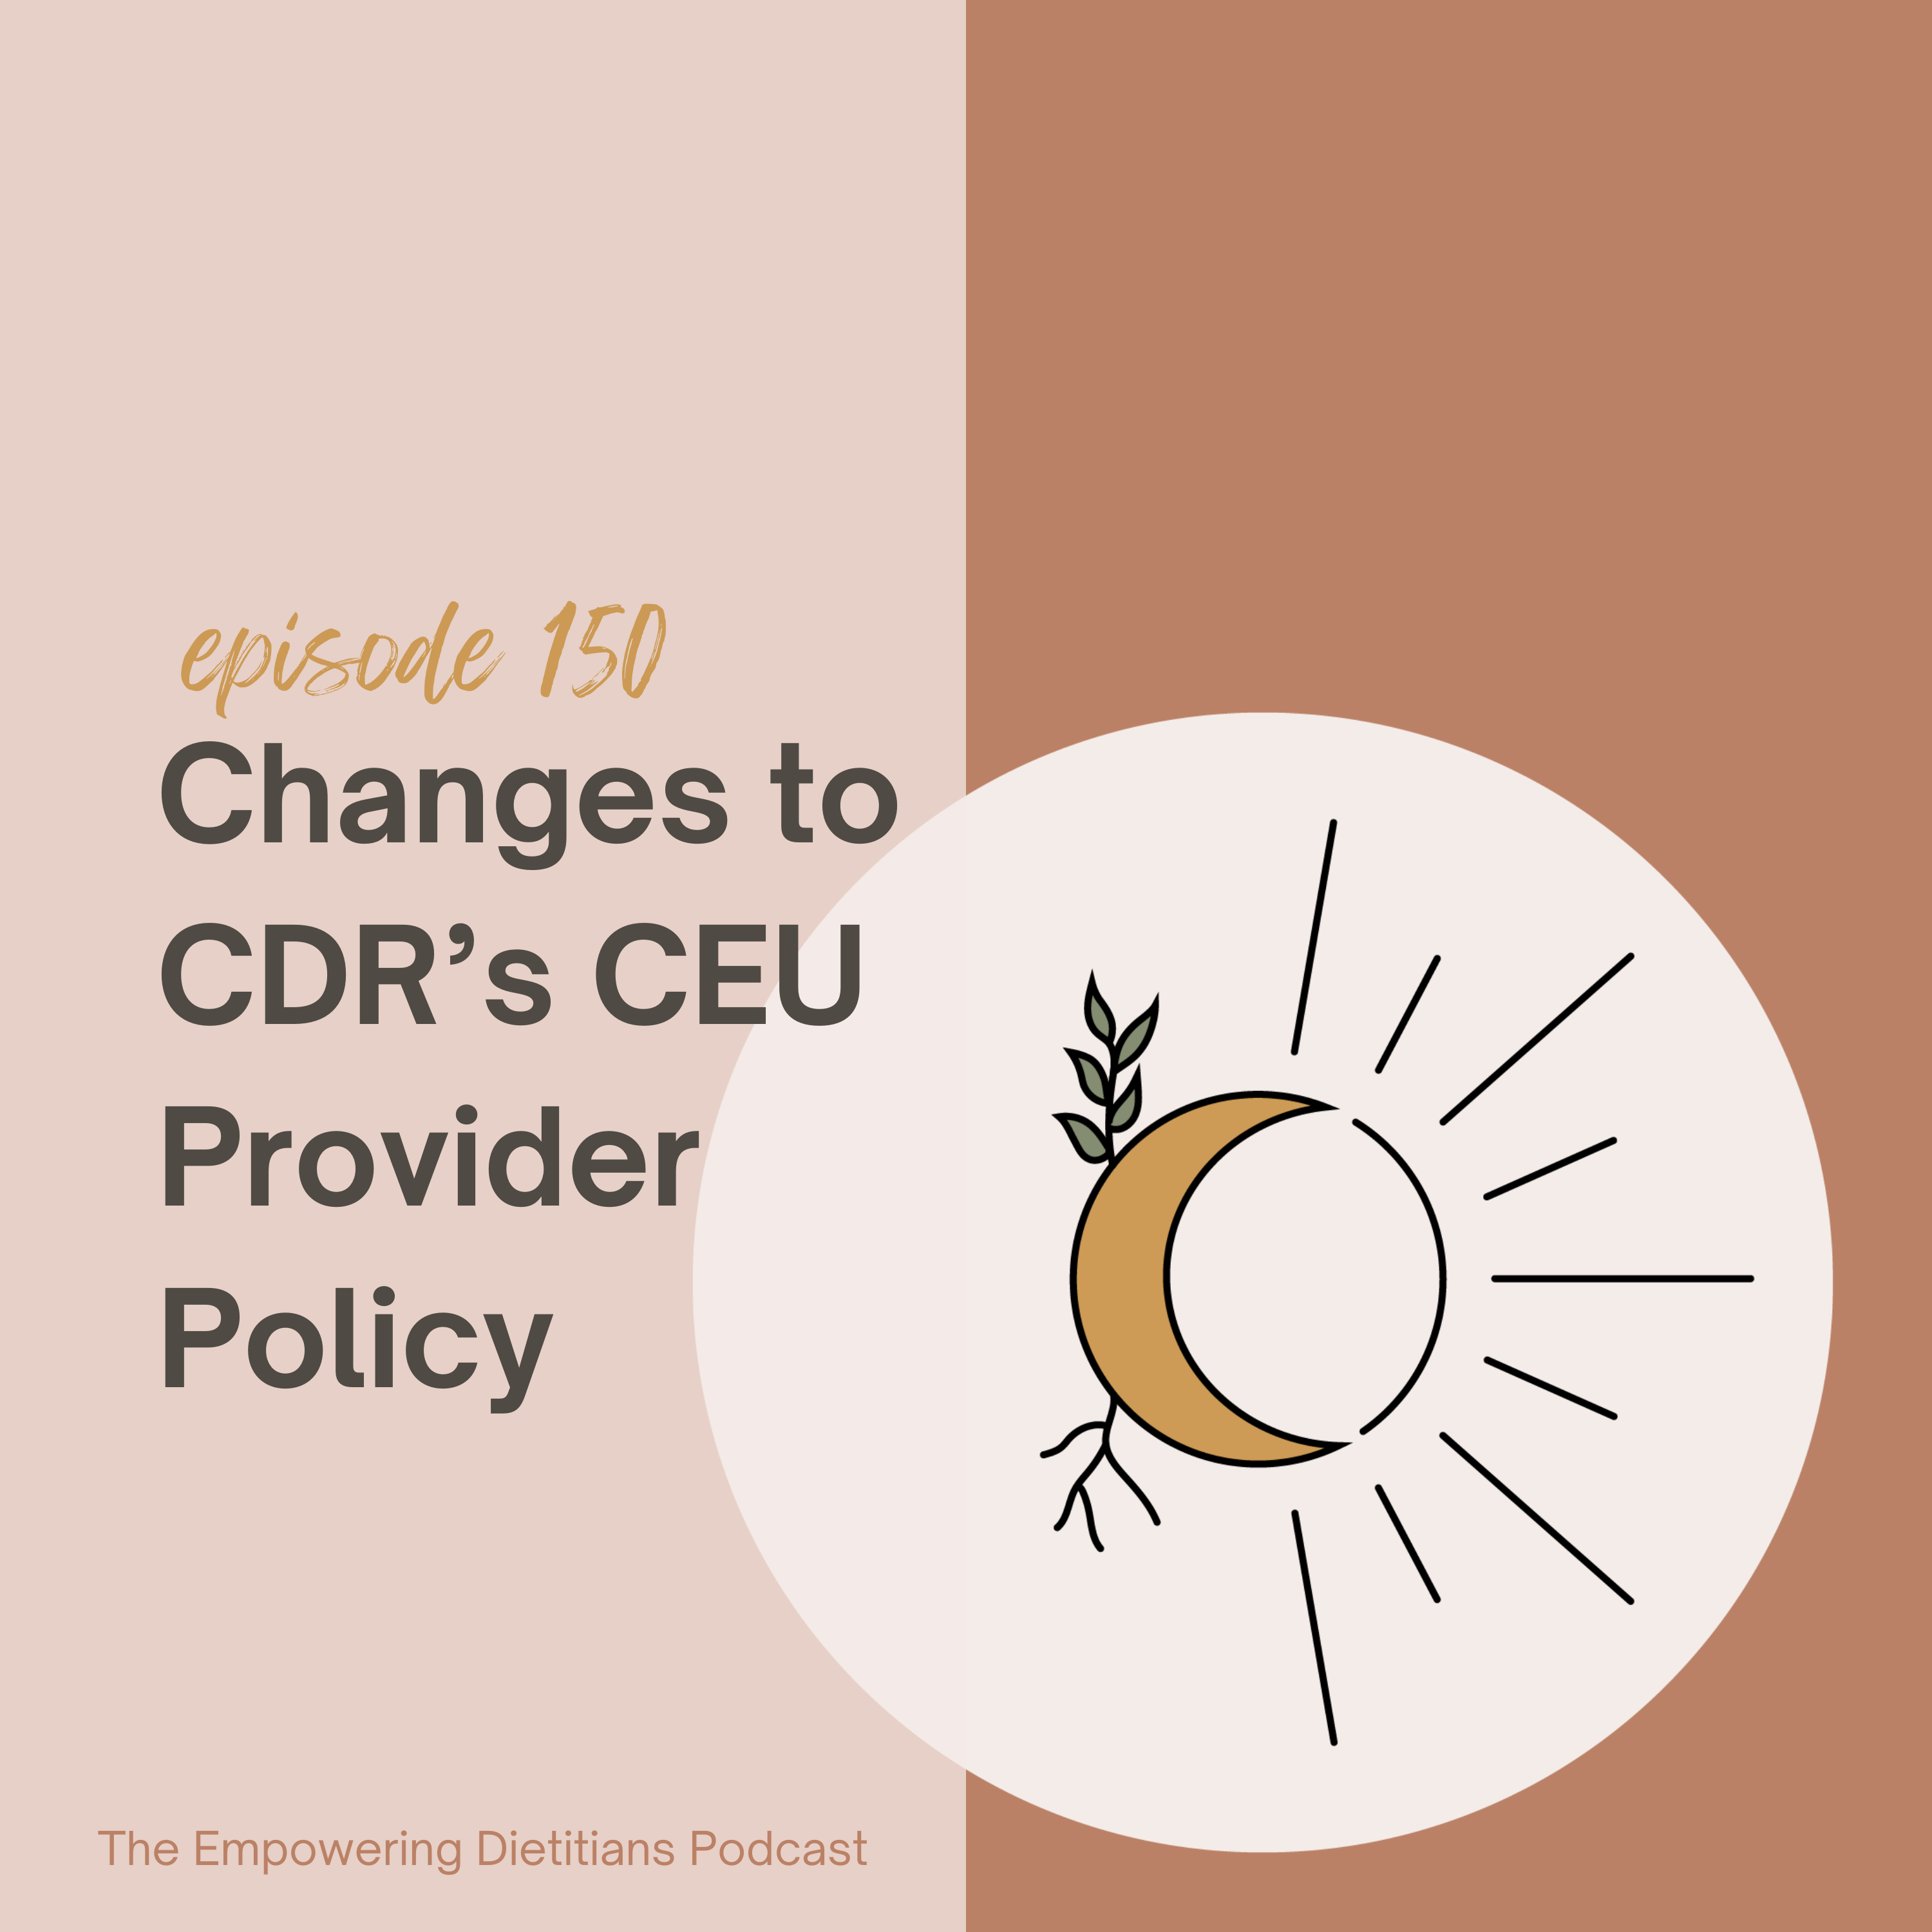 Changes to CDR's CEU Provider Policy